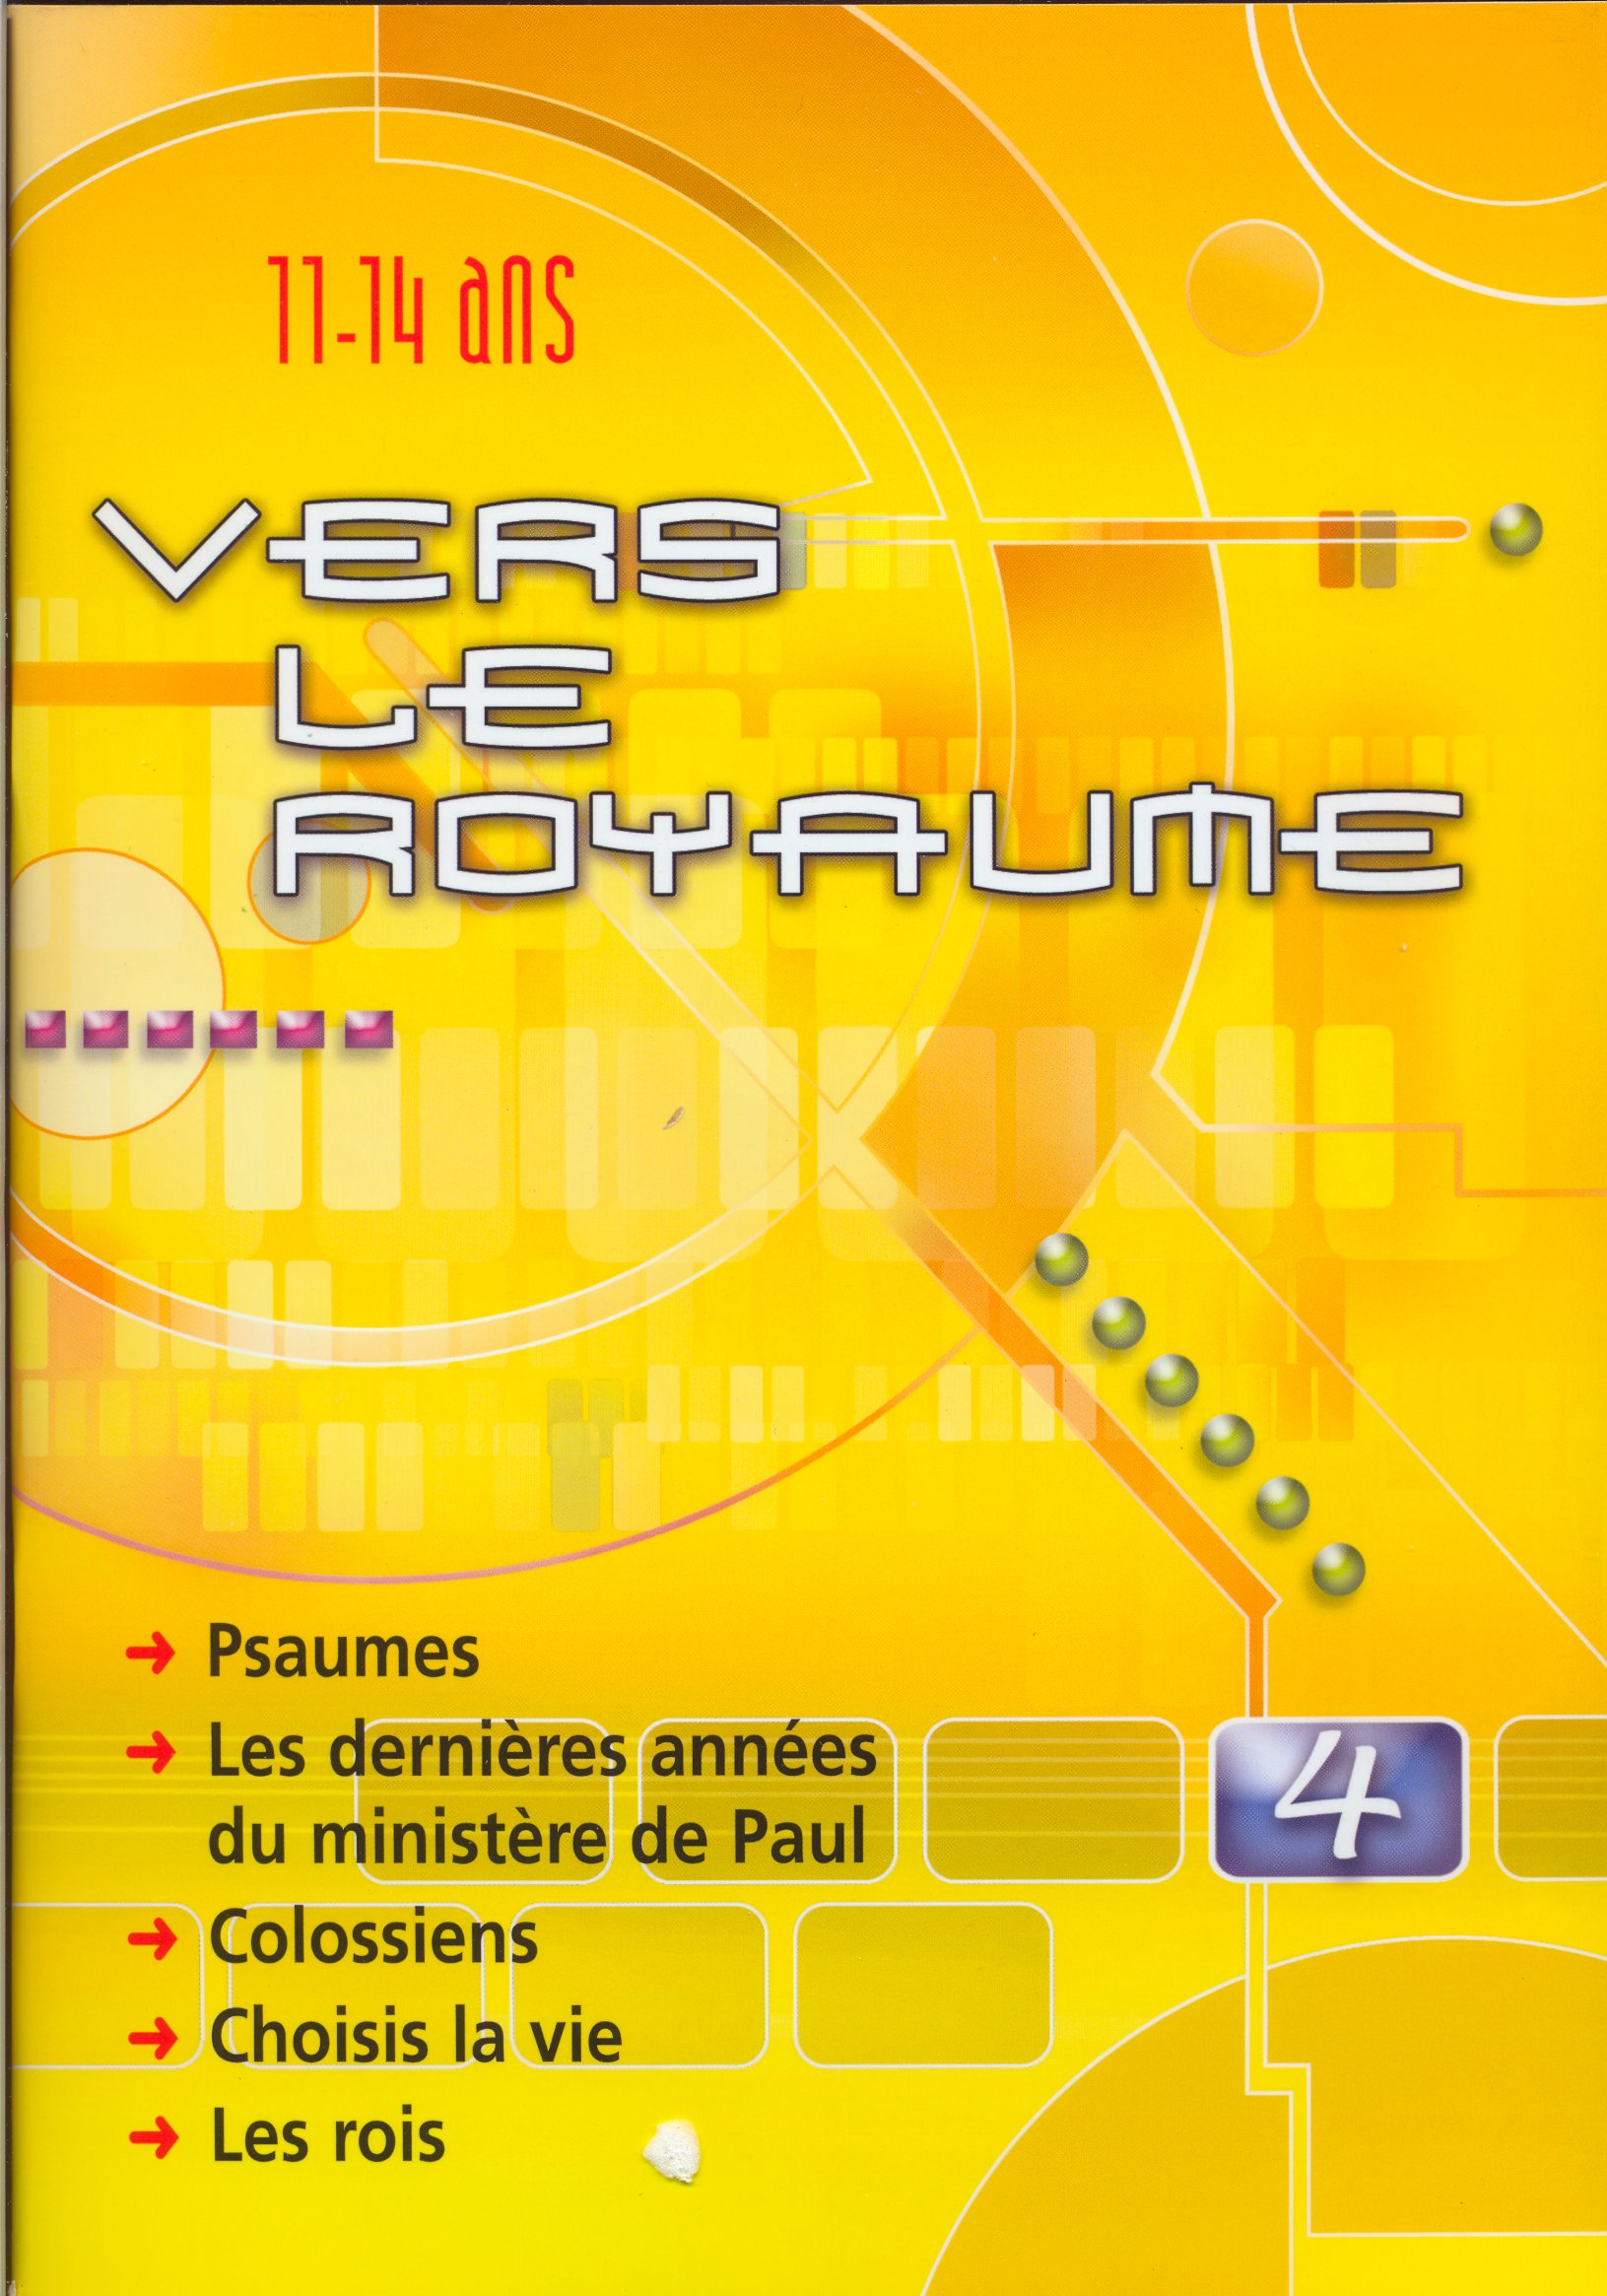 VERS LE ROYAUME 4 PSAUMES, PAUL, COLOSSIENS